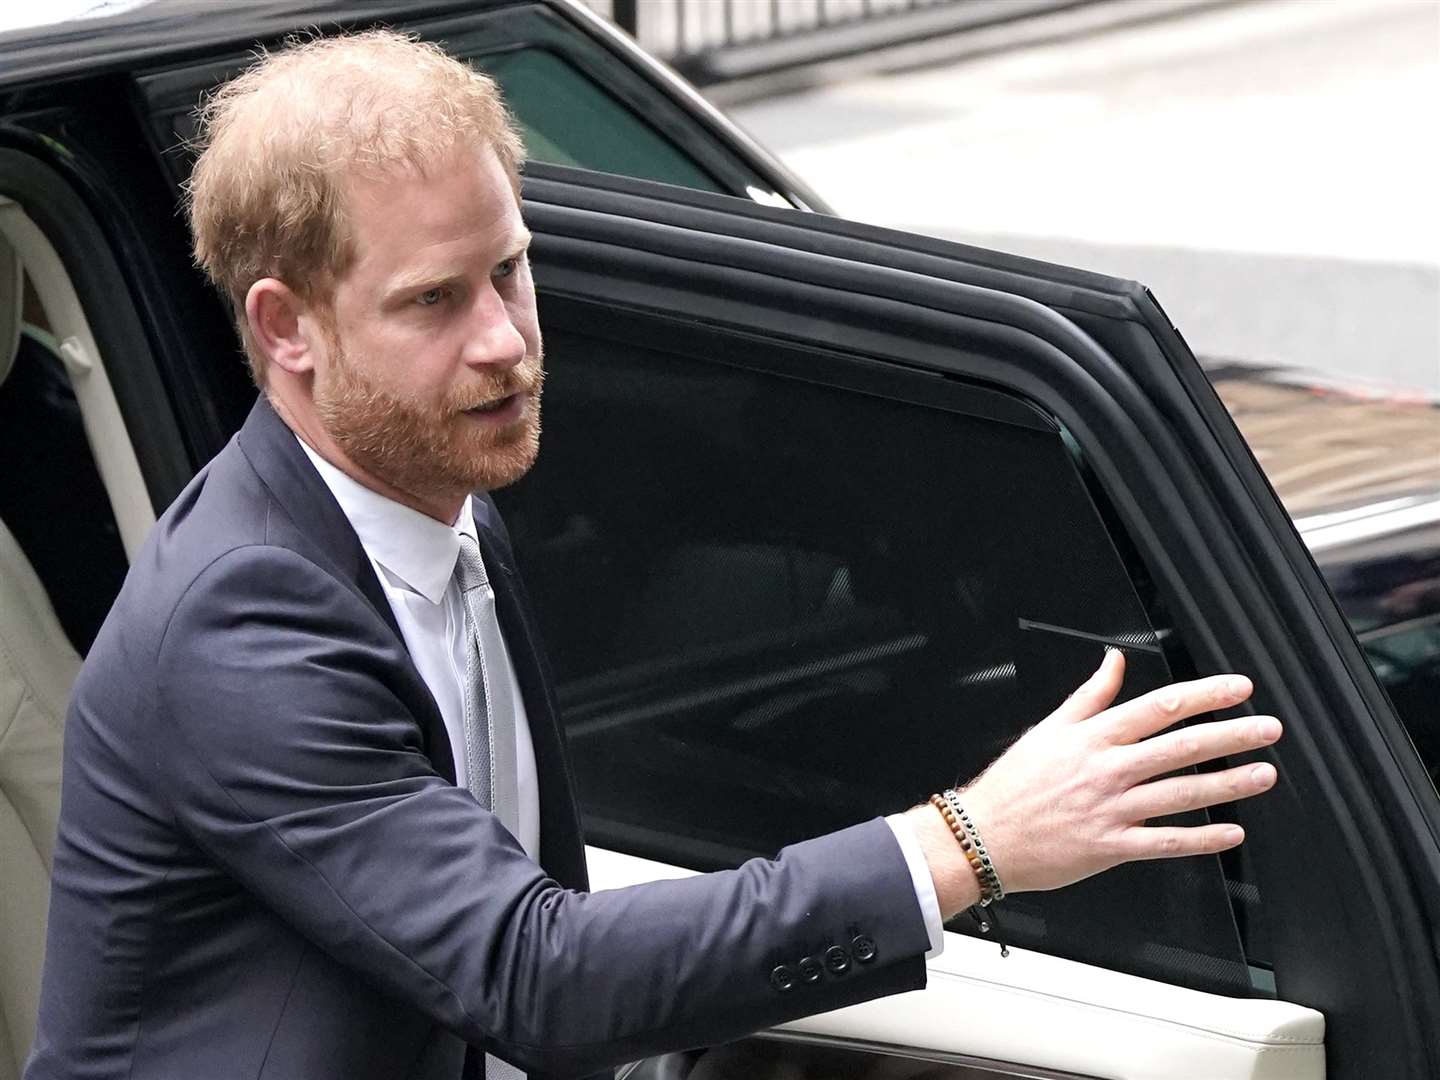 The Duke of Sussex arriving at the Rolls Buildings in central London to give evidence in a phone-hacking trial against Mirror Group Newspapers in June (Jonathan Brady/PA)